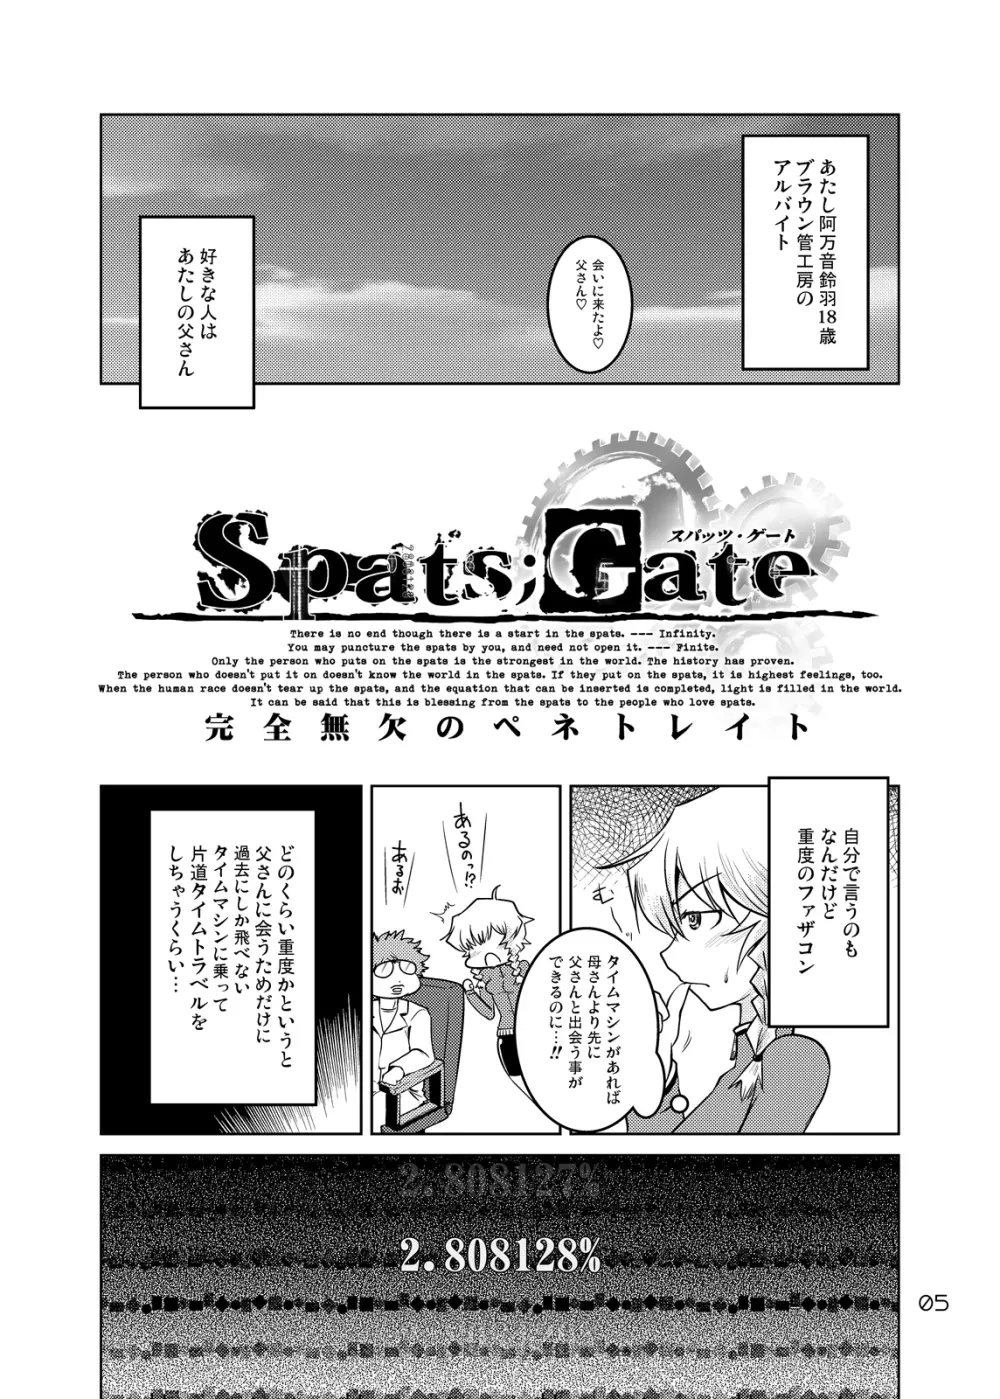 Spats;Gate 完全無欠のペネトレイト Page.4